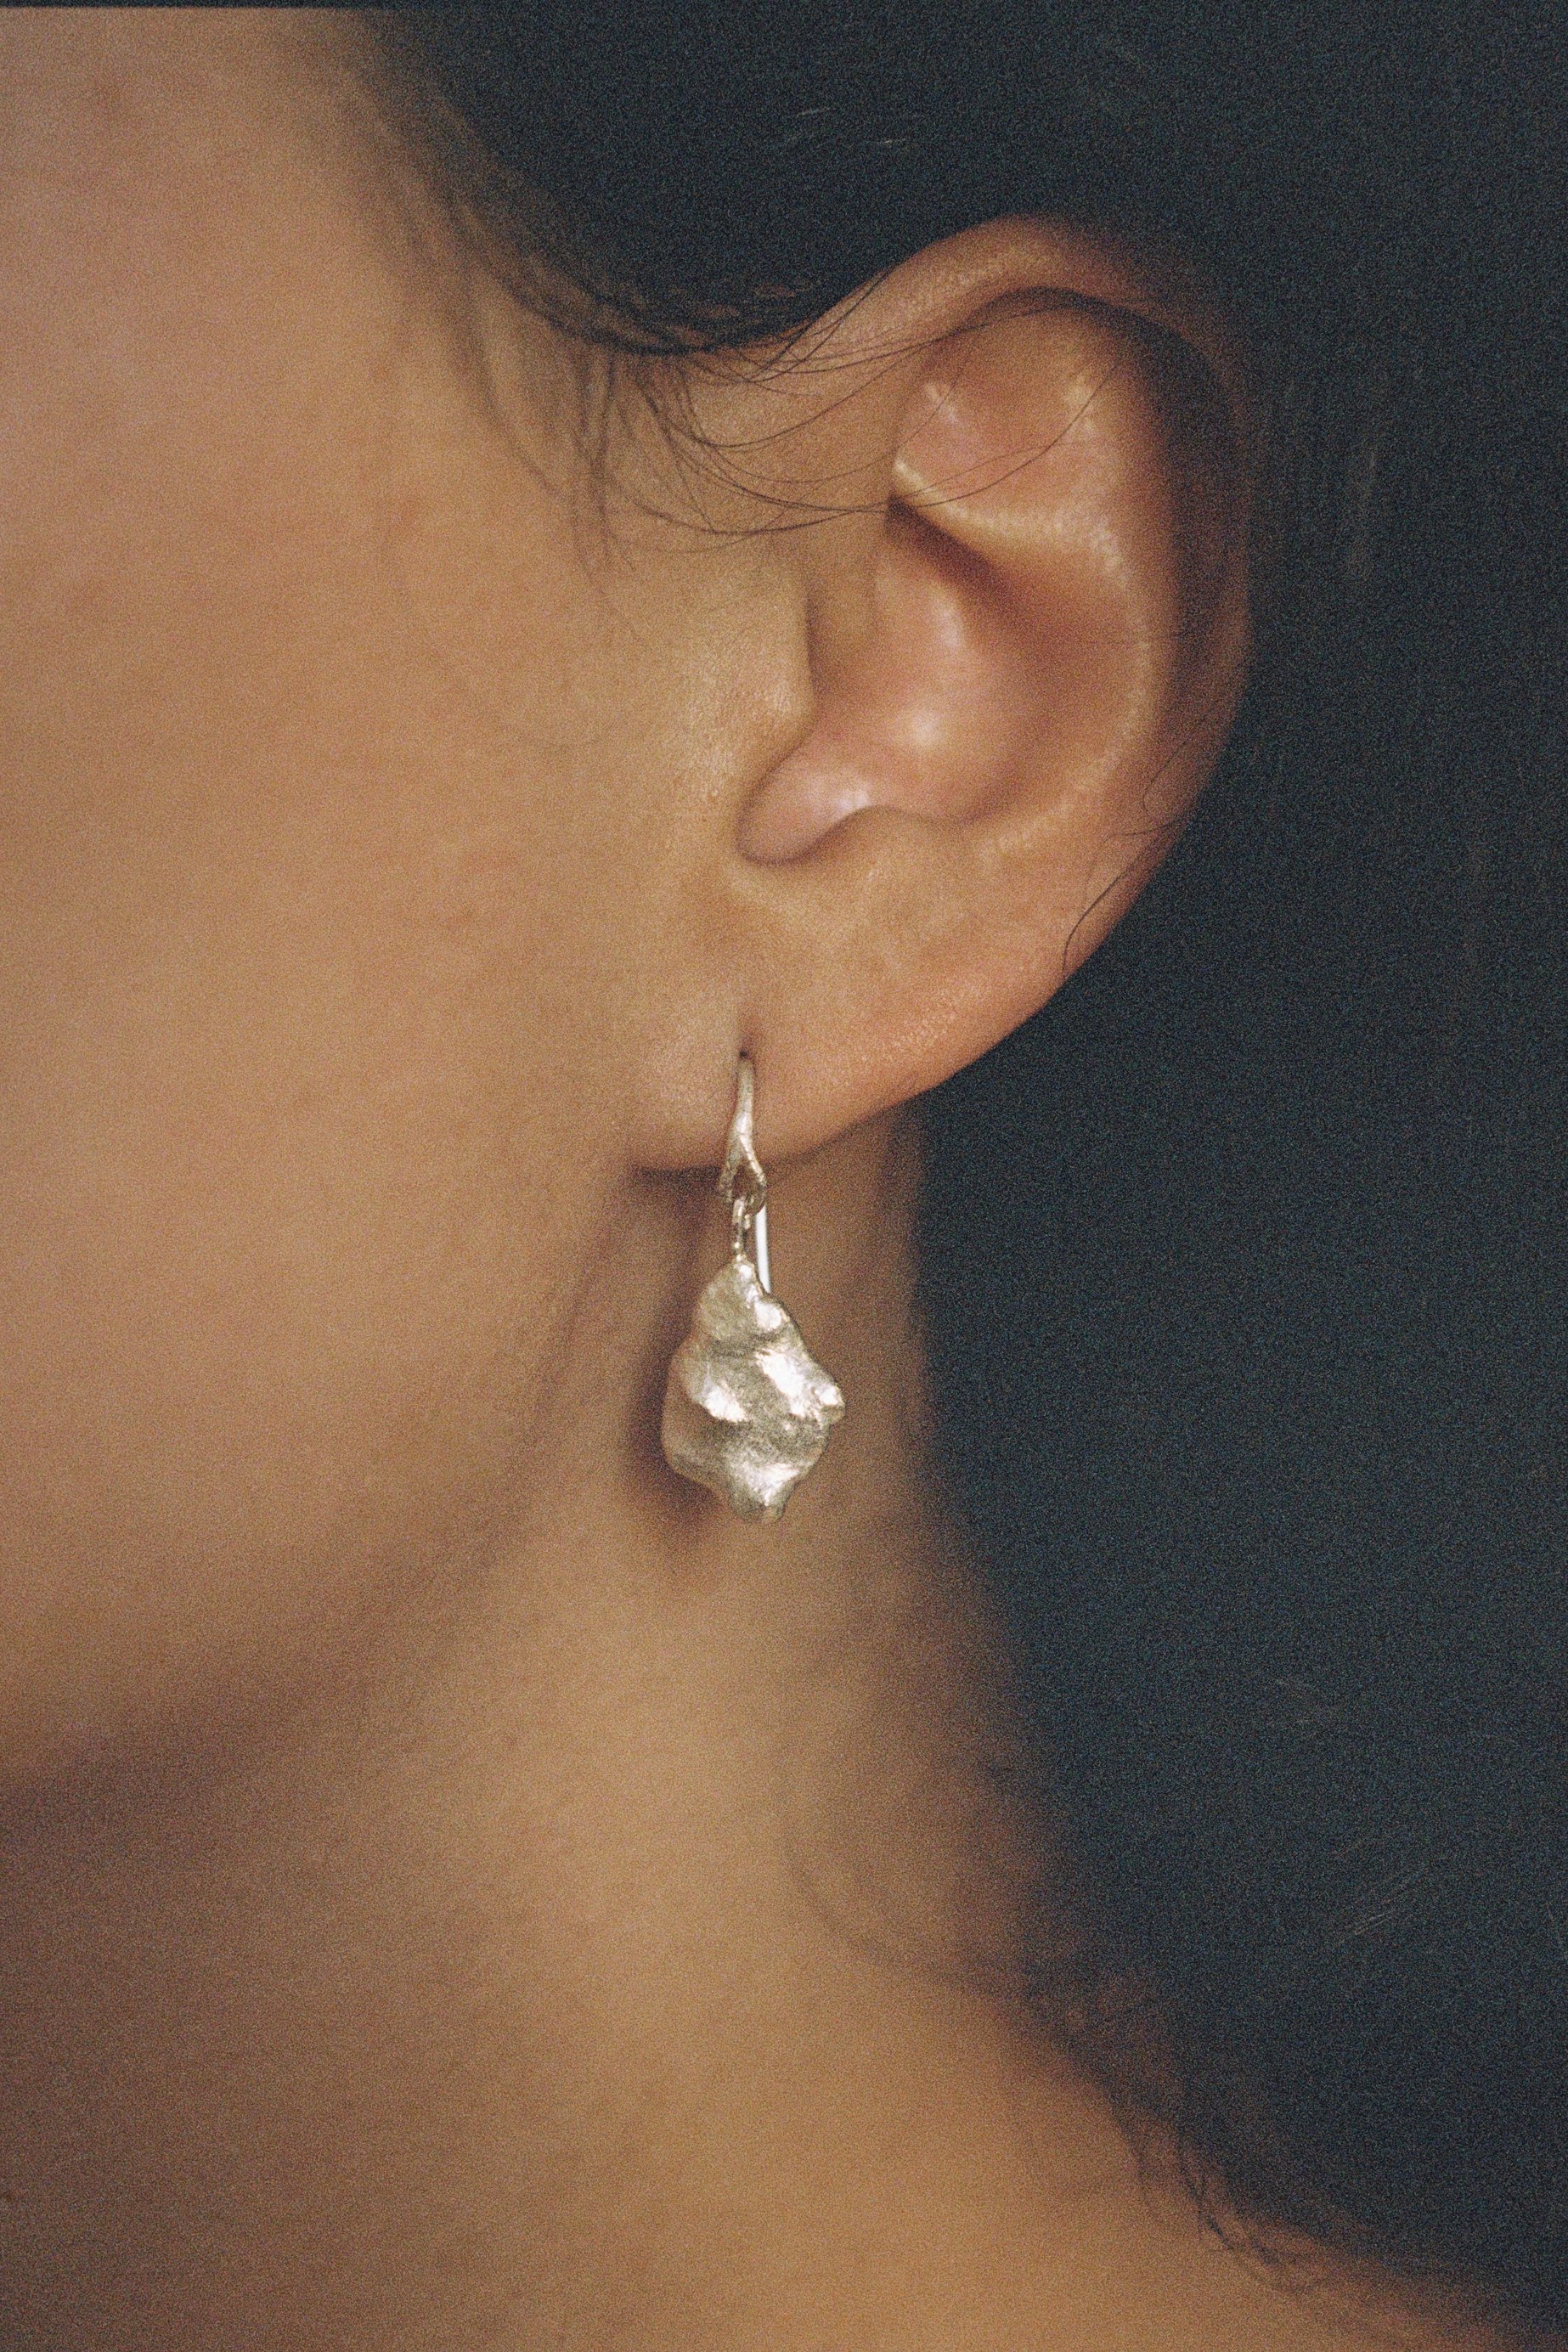 Image of Edition 5. Piece 11. Earrings